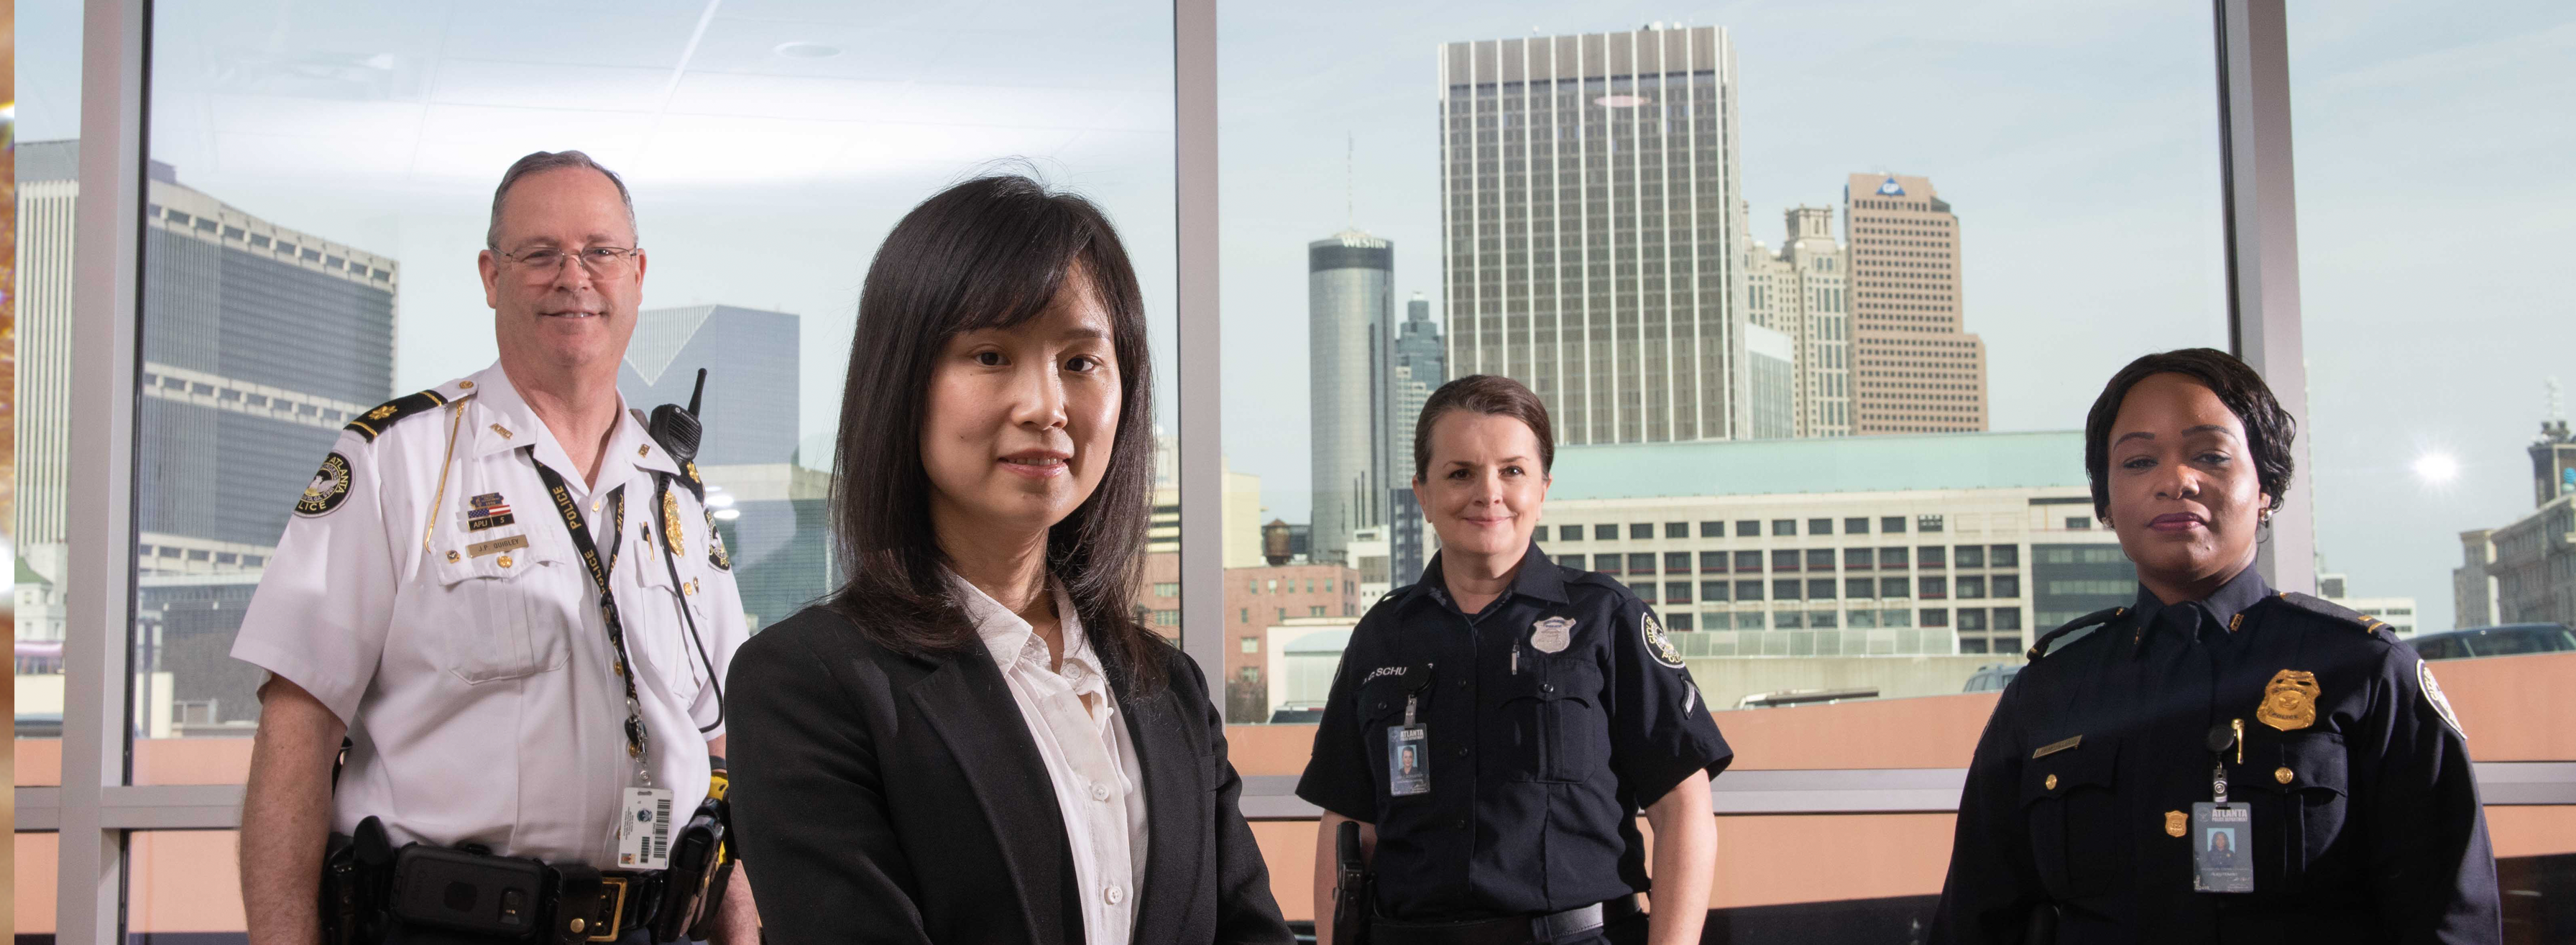 Georgia Tech Yao and Multiple Officers